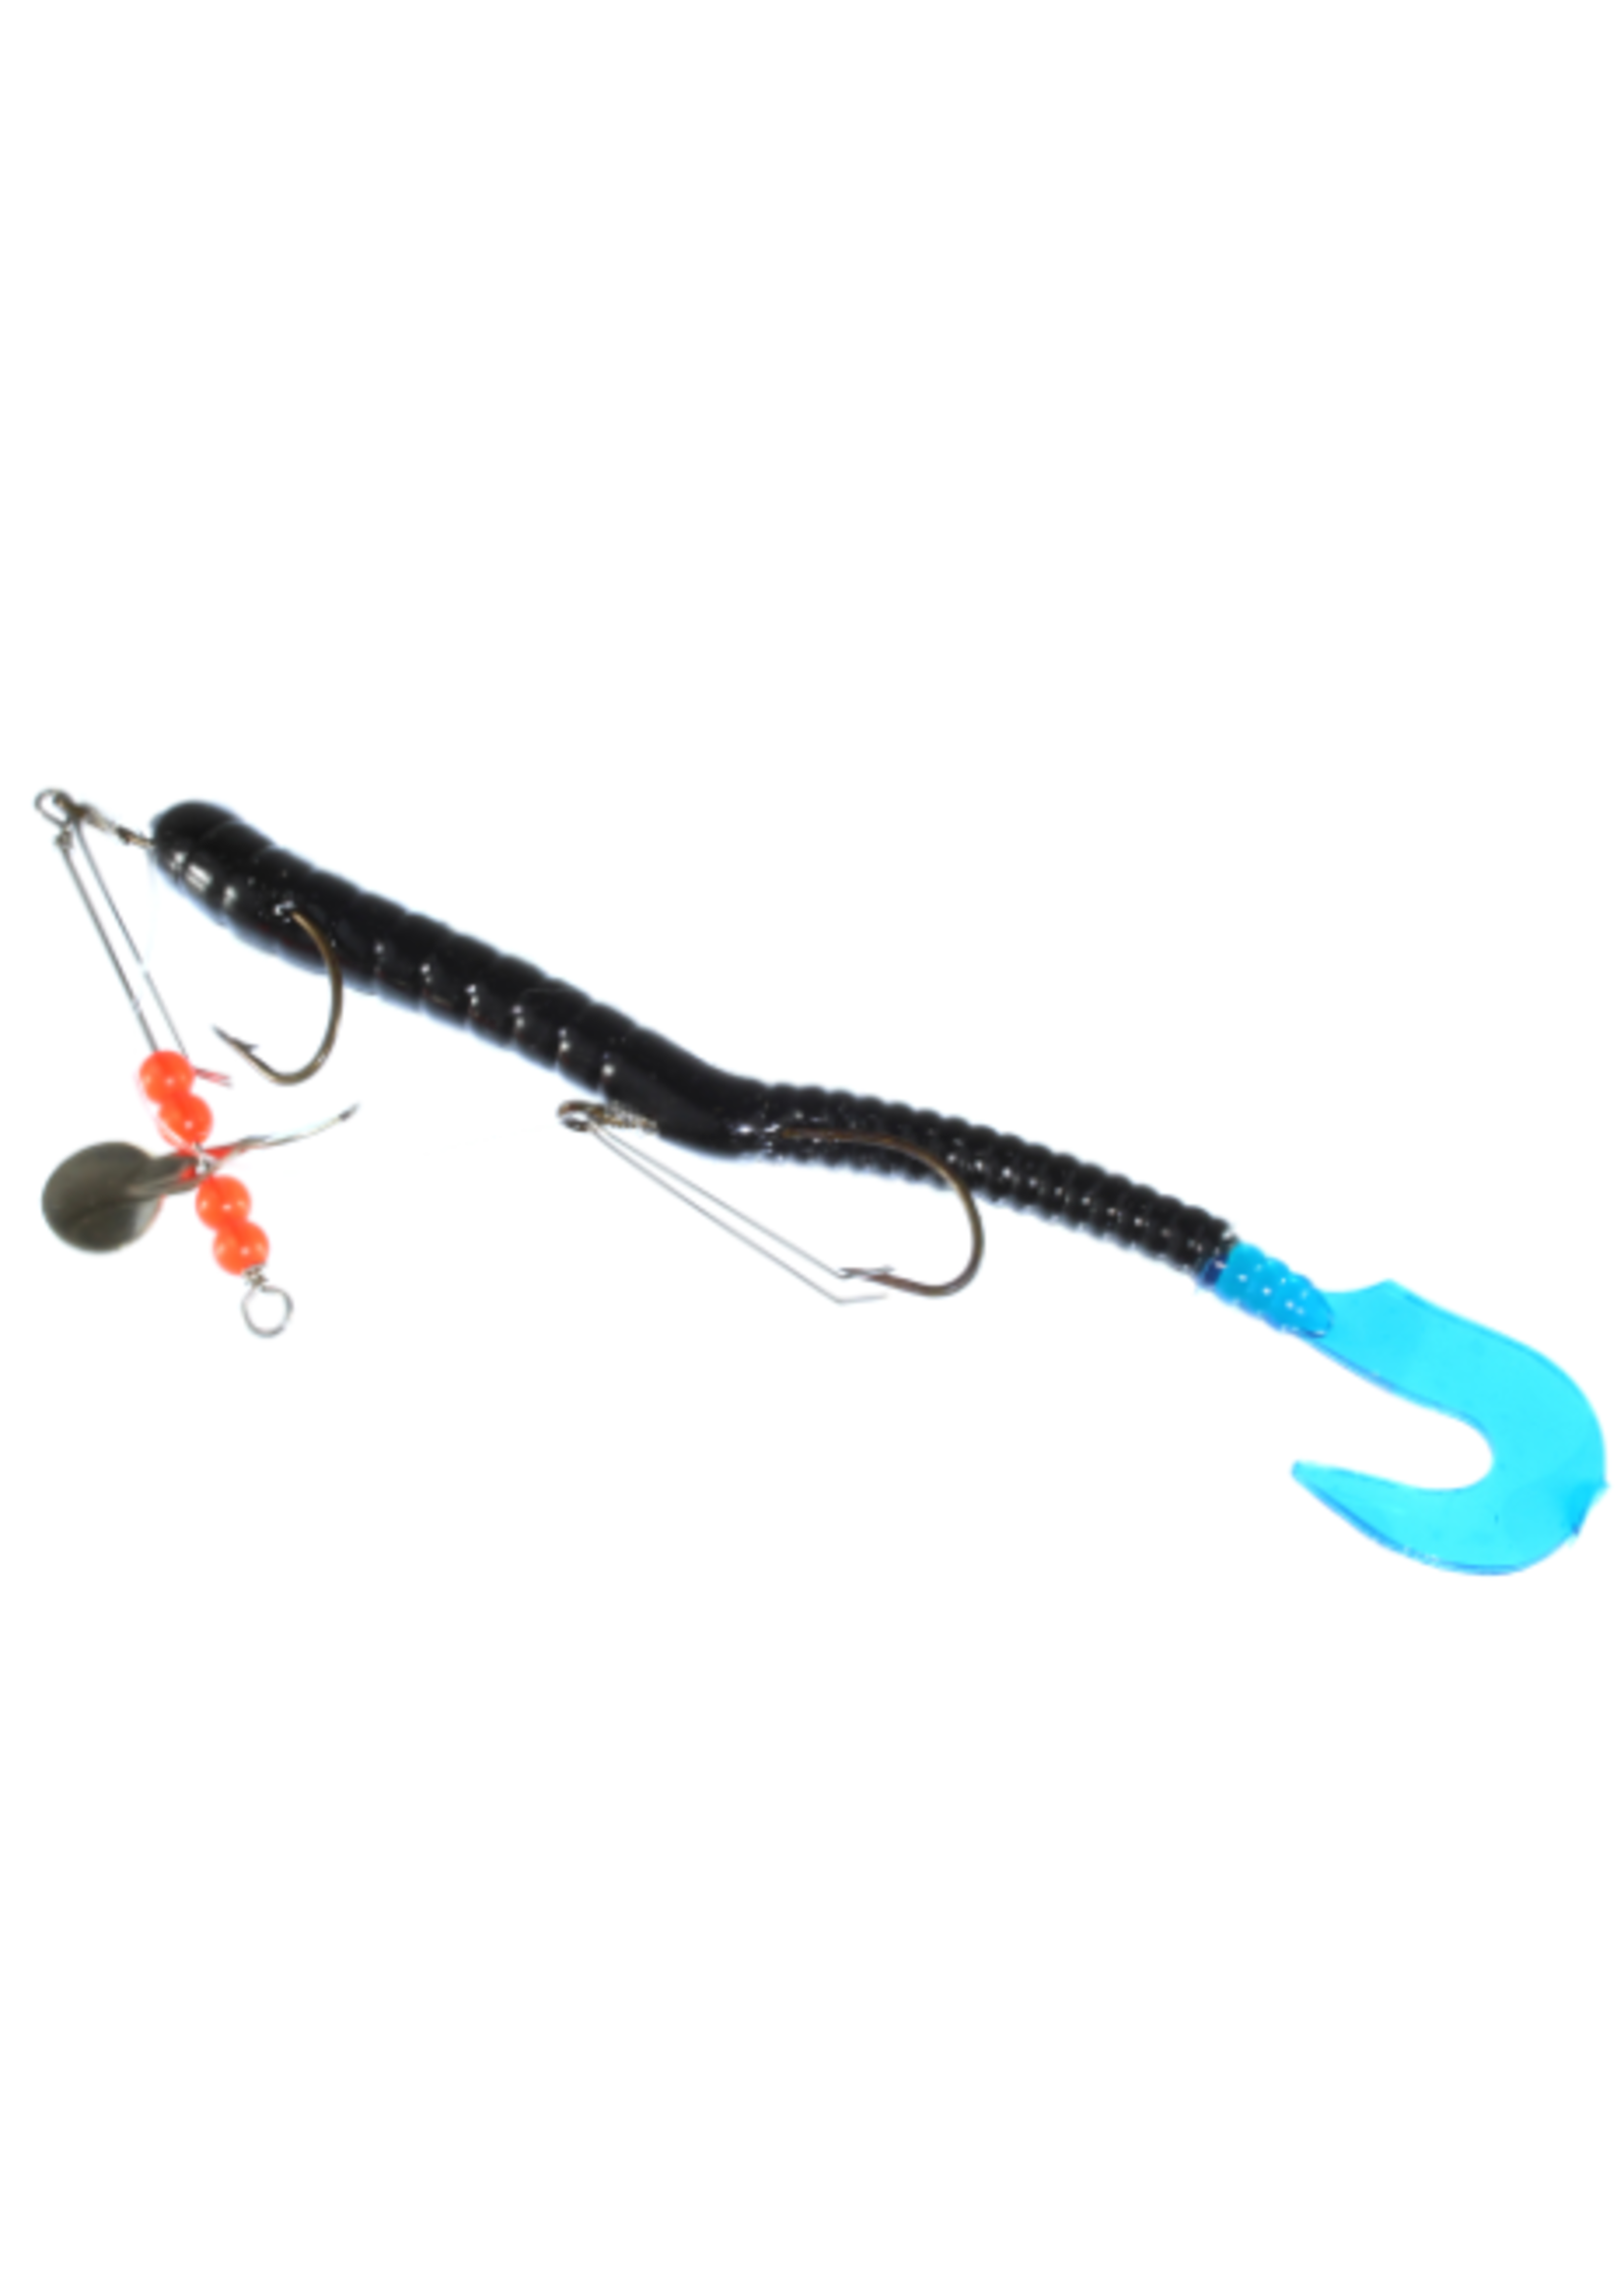 Creme Pre-Rigged Curl 6" Black with Blue Tail